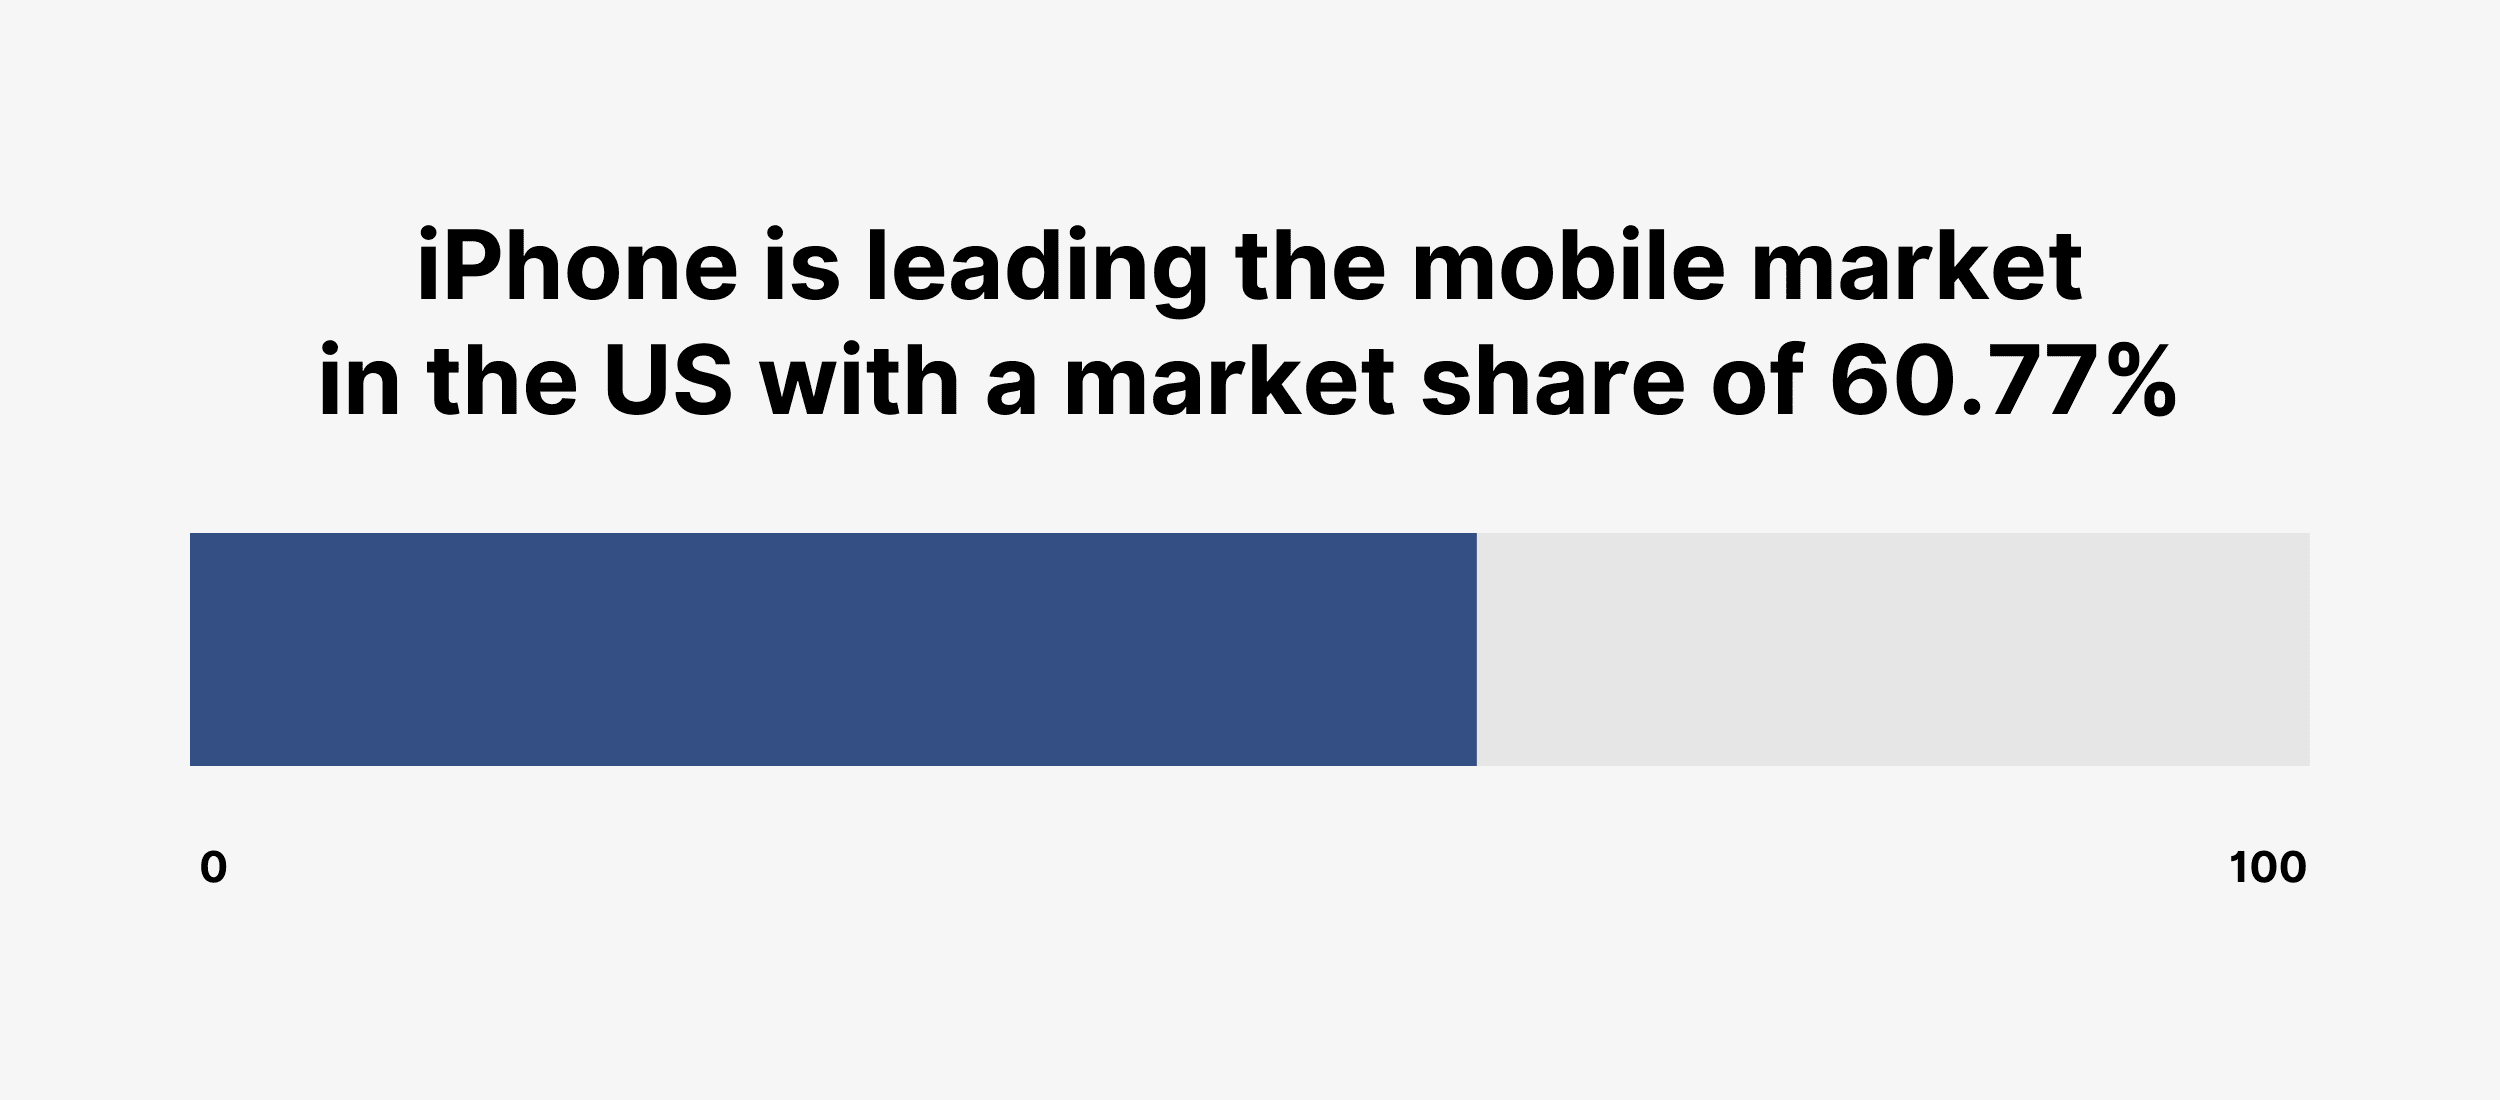 iPhone is leading the mobile market in the US with a market share of 60.77%